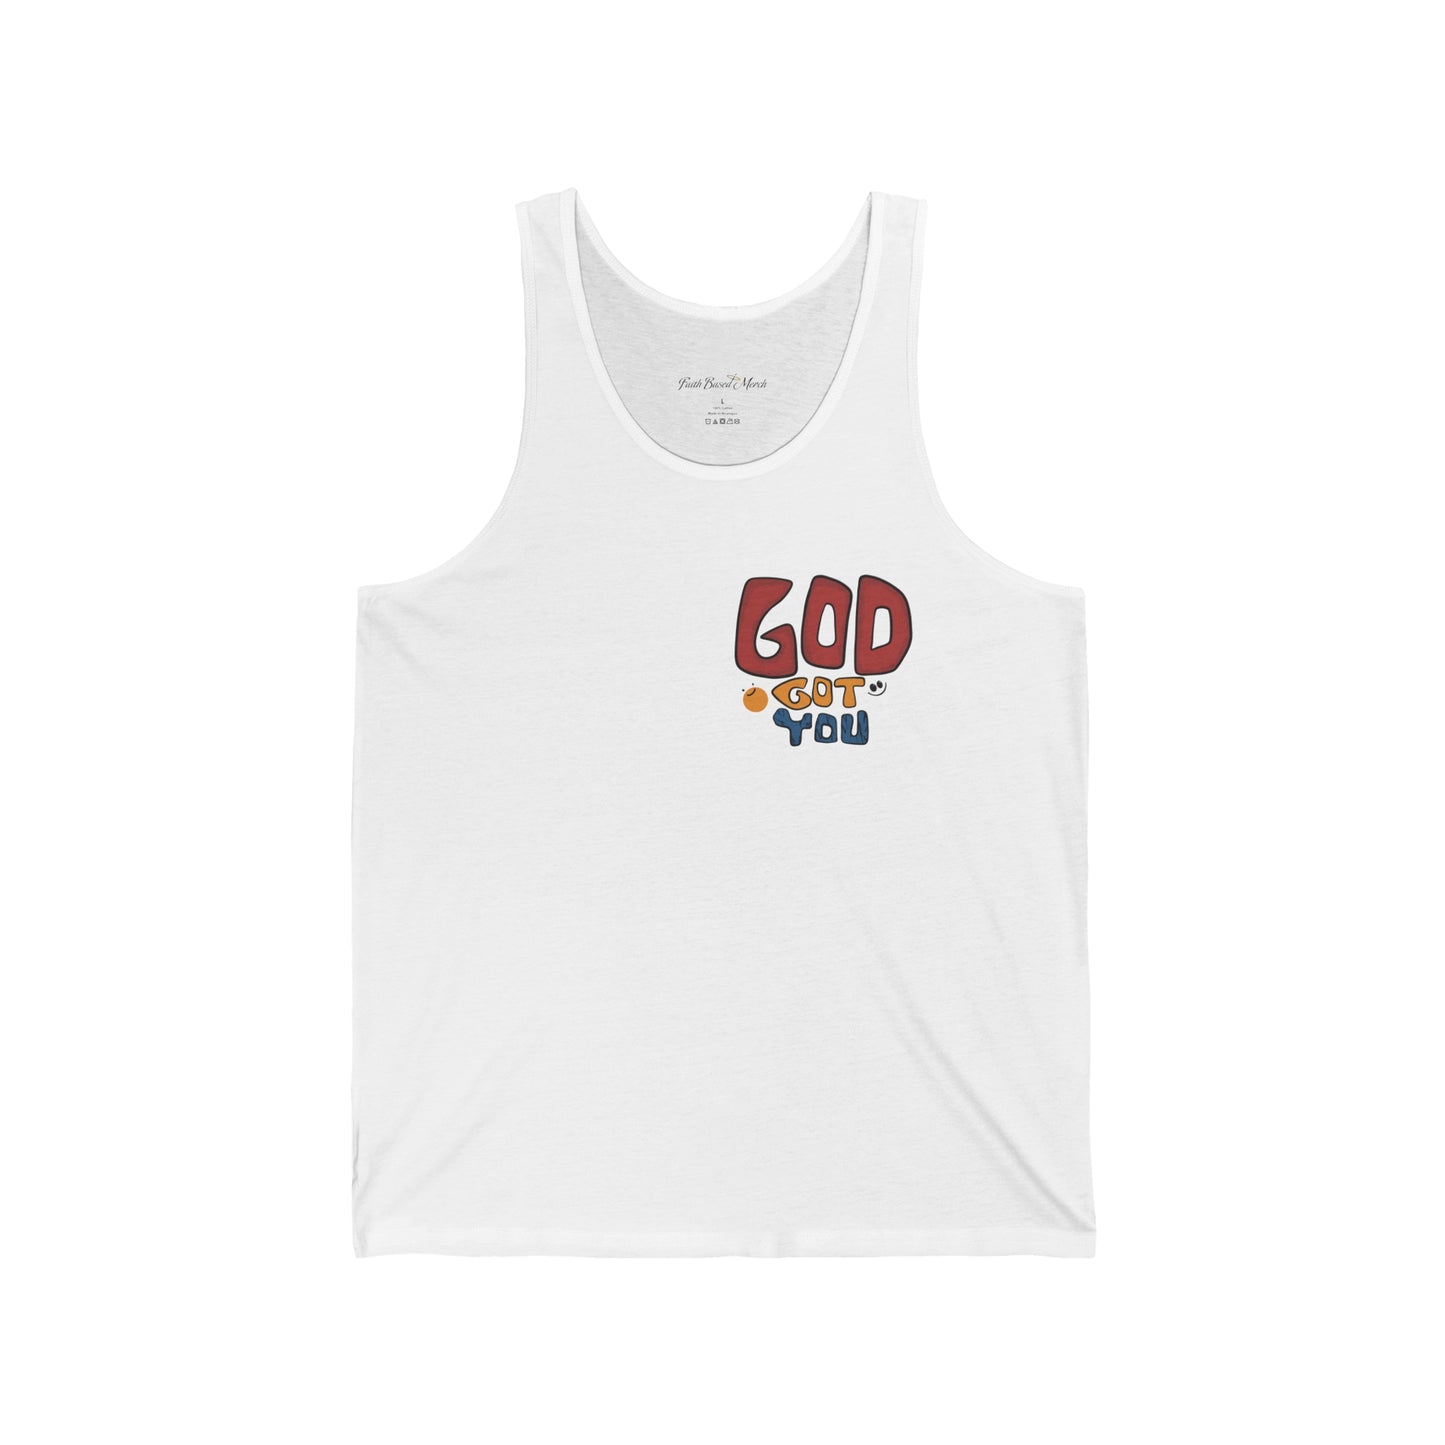 God Got You Tank Top (Double-Sided) - White